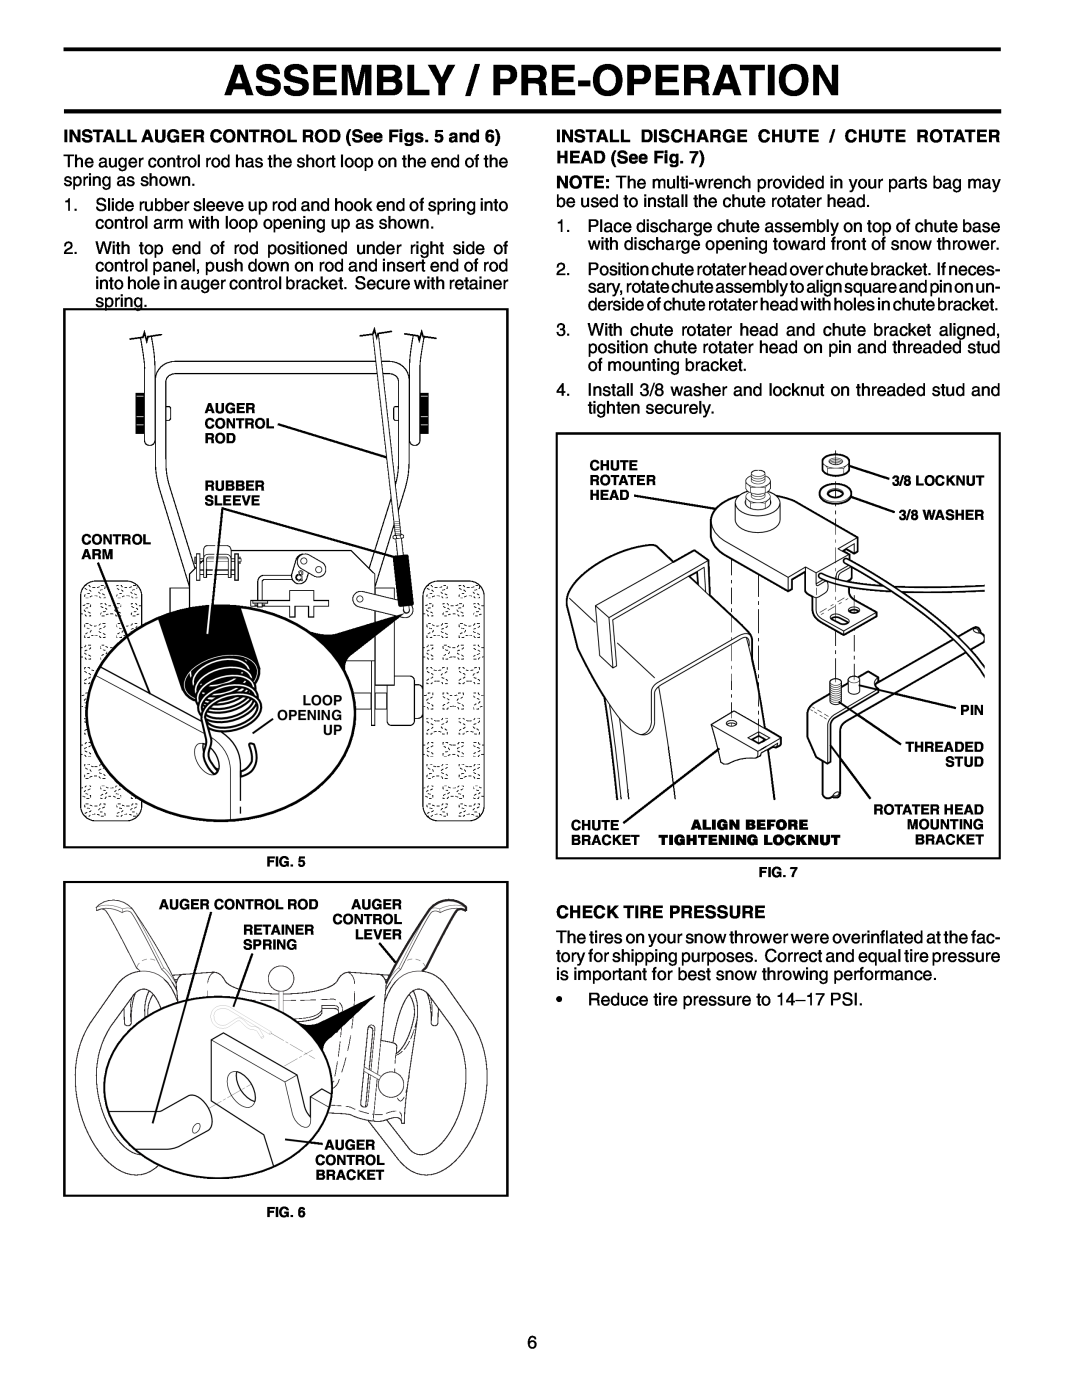 Poulan 199375 owner manual Assembly / Pre-Operation, INSTALL AUGER CONTROL ROD See Figs. 5 and, Check Tire Pressure 